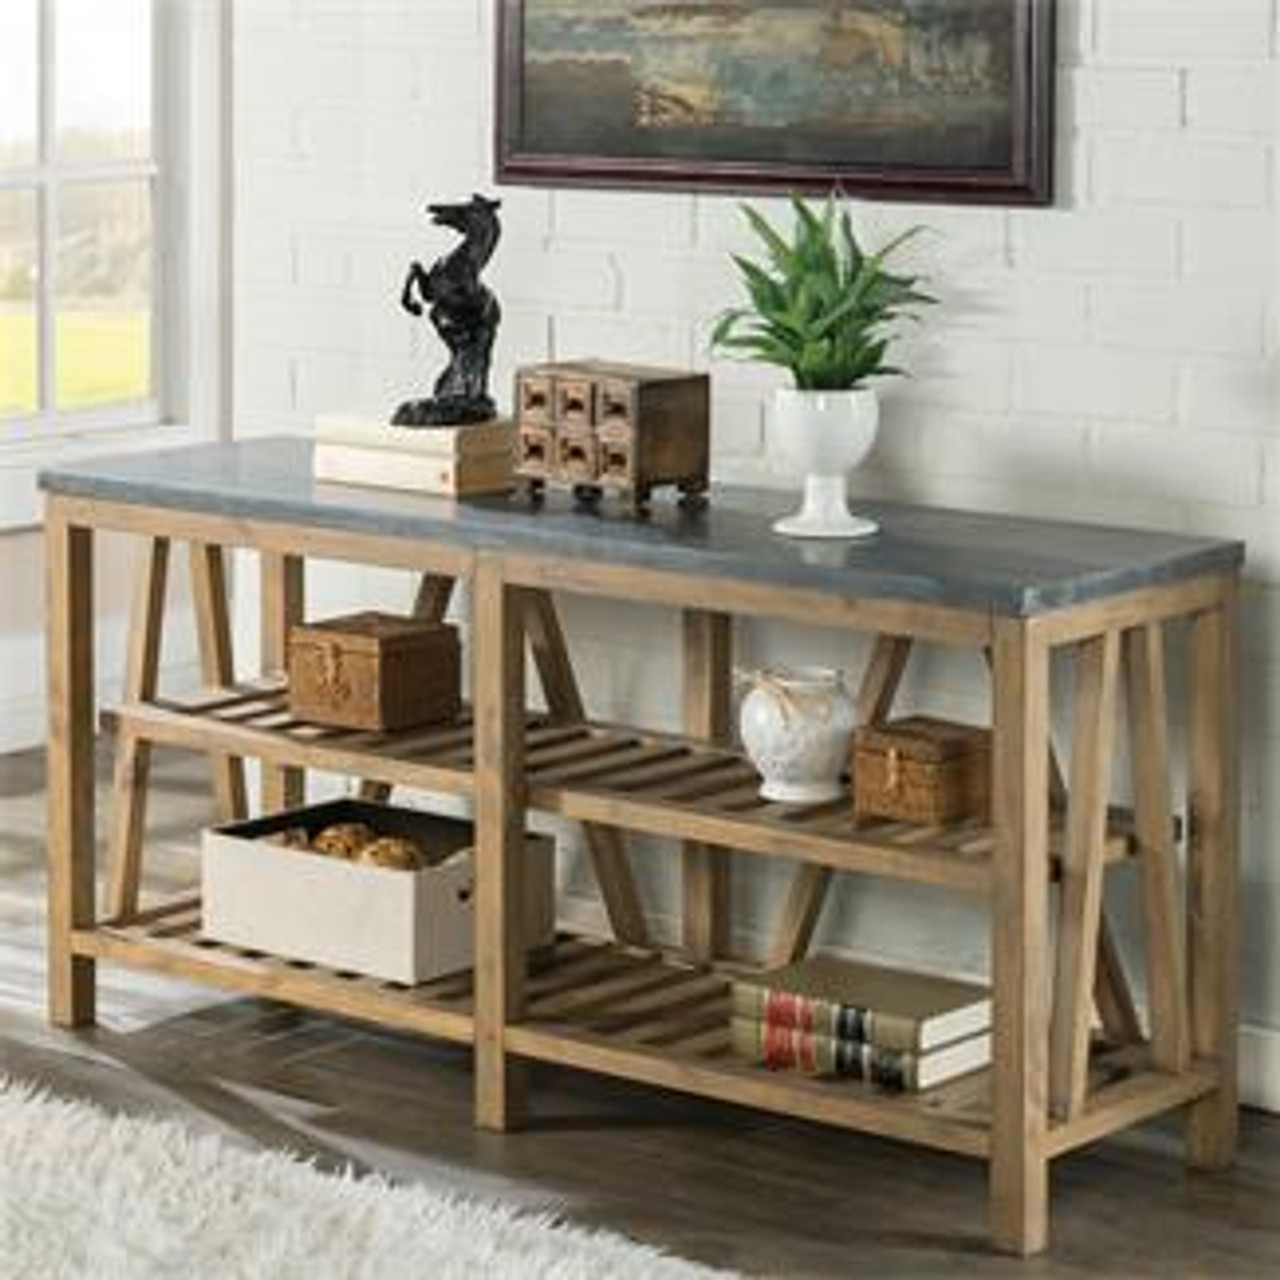 Buy Weatherford Sofa Couch Table On Sale Near Houston Friendswood